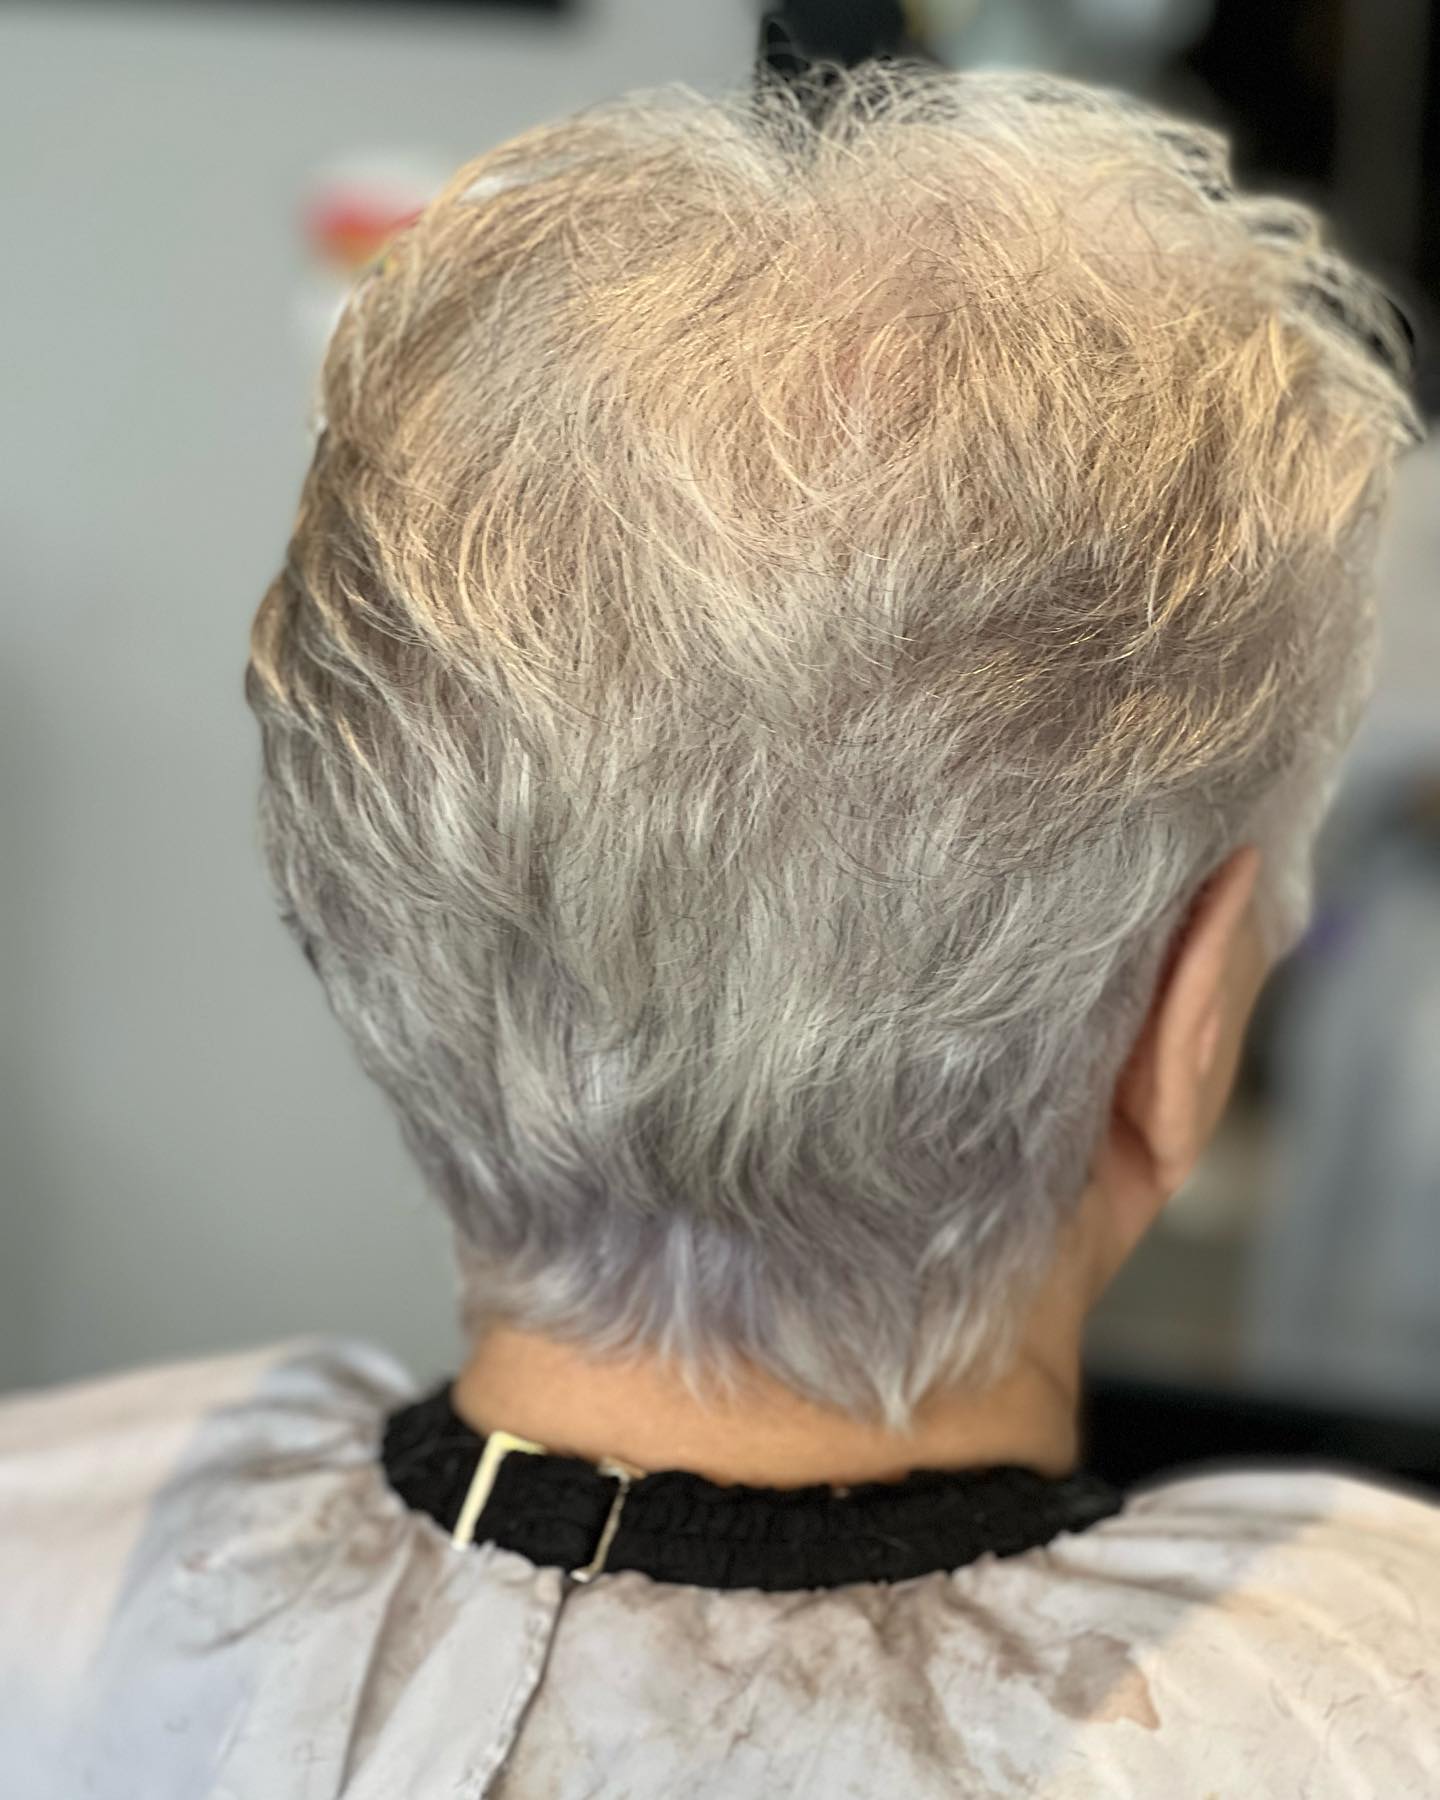 Hairstyles for Women Over 70 21 Hairstyles for over 70 with fine hair | Hairstyles for over 70 with glasses | Medium length hairstyles for women over 70 Hairstyles for Women over 70